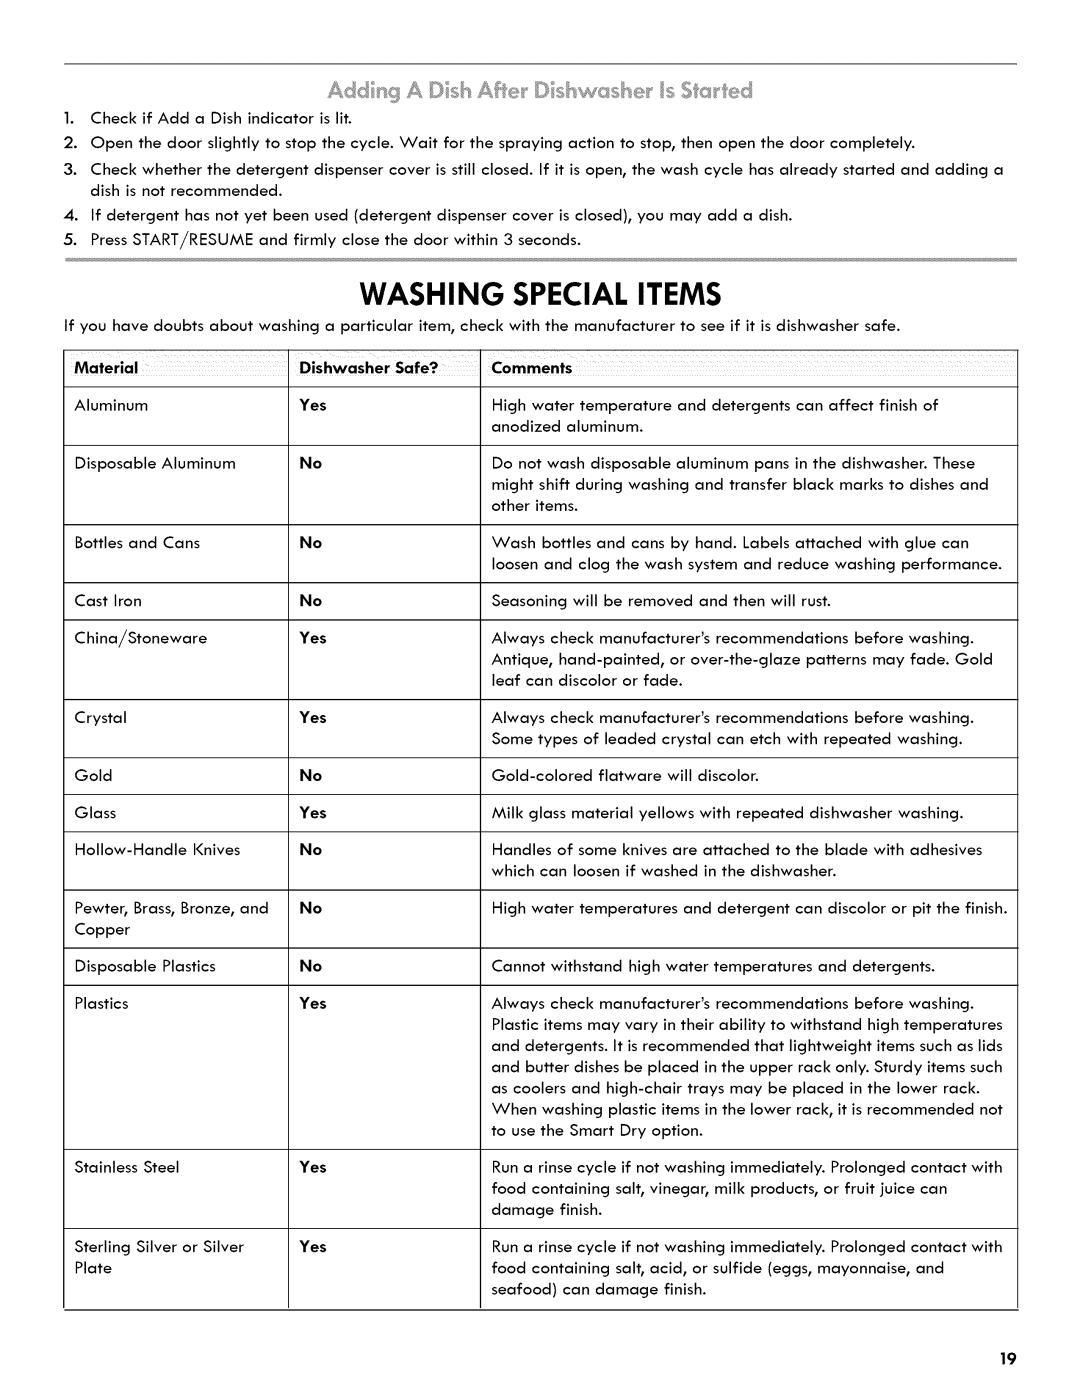 Kenmore 665.1404 manual Washing Special Items, Dishwasher Safe?, Comments 